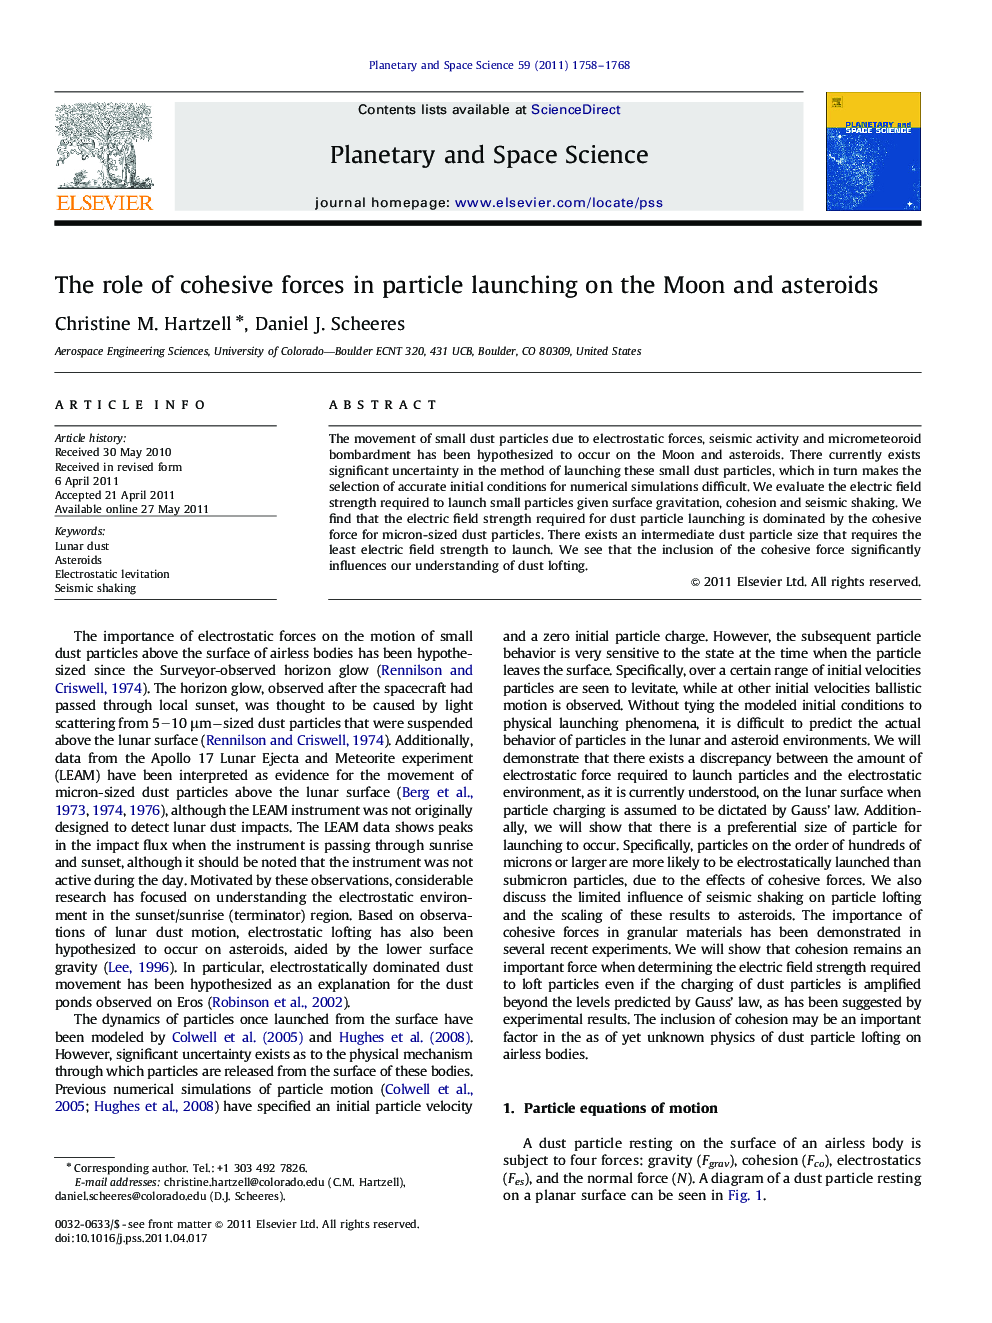 The role of cohesive forces in particle launching on the Moon and asteroids